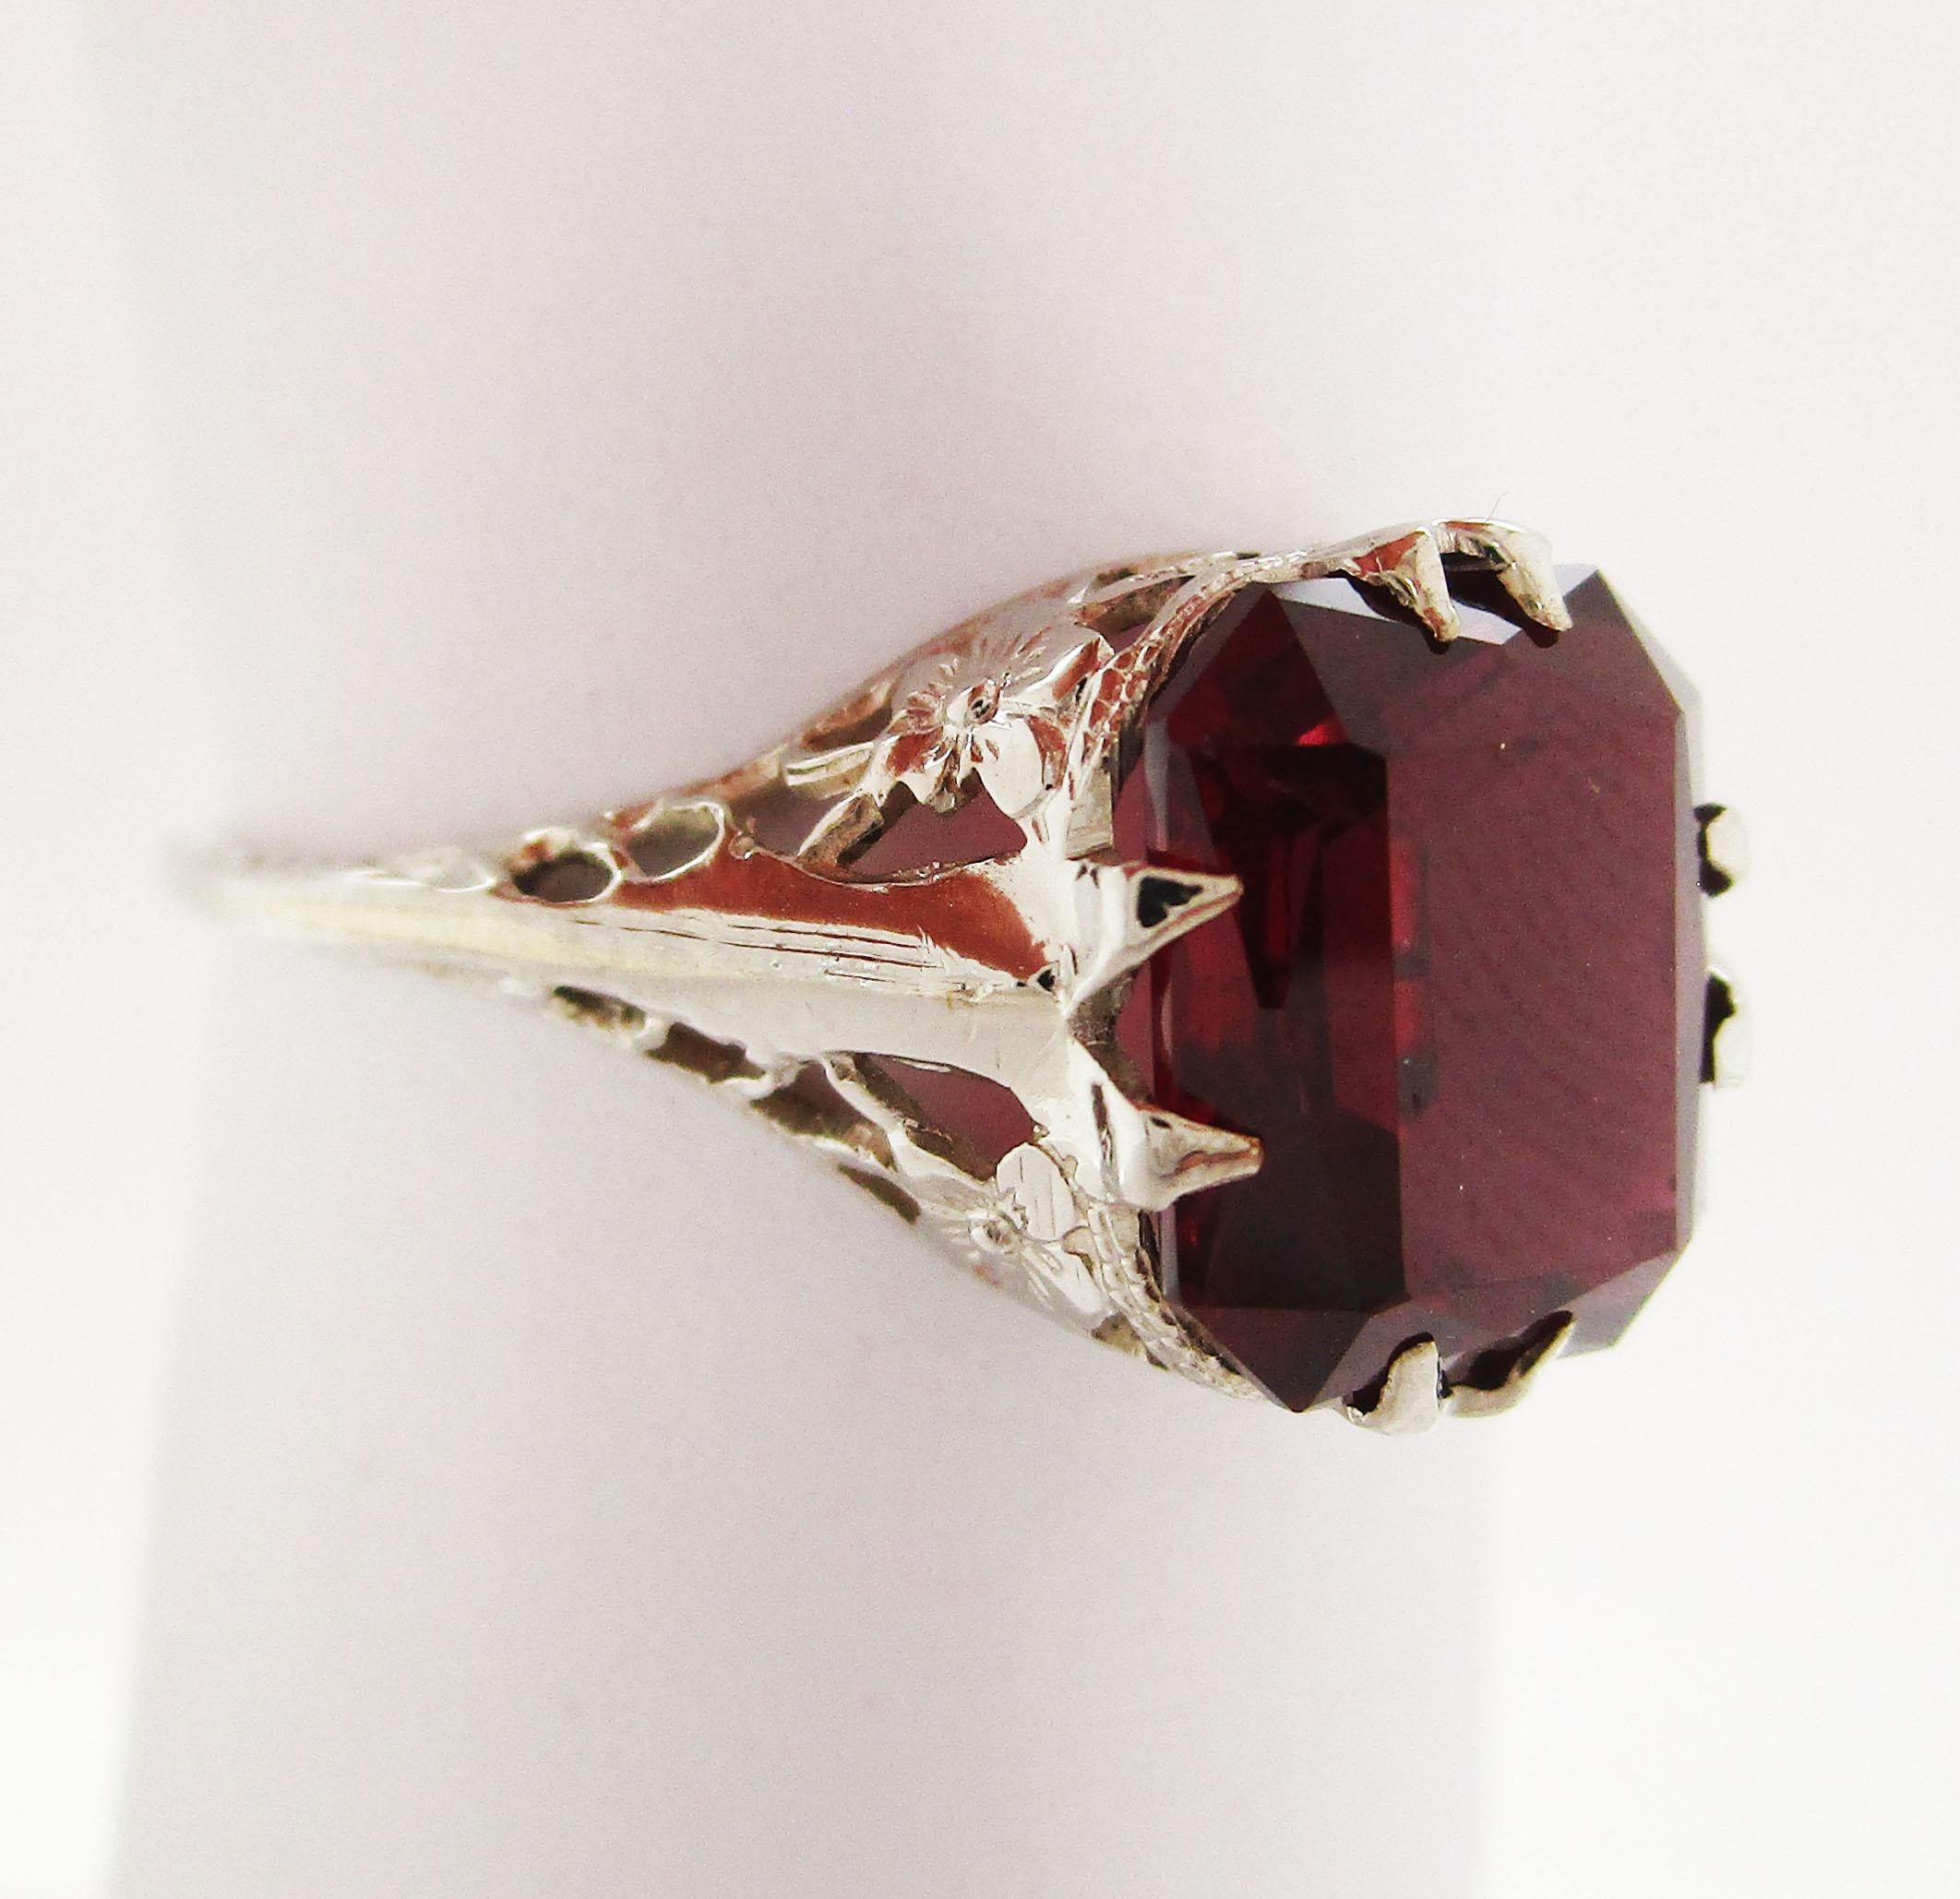 This is an absolutely stunning Art Deco ring in 14k white gold with romantic filigree detailing and a gorgeous red garnet center. This is a classic Art Deco ring with a subtle elegance! The shoulders of the ring have engraved details, while the